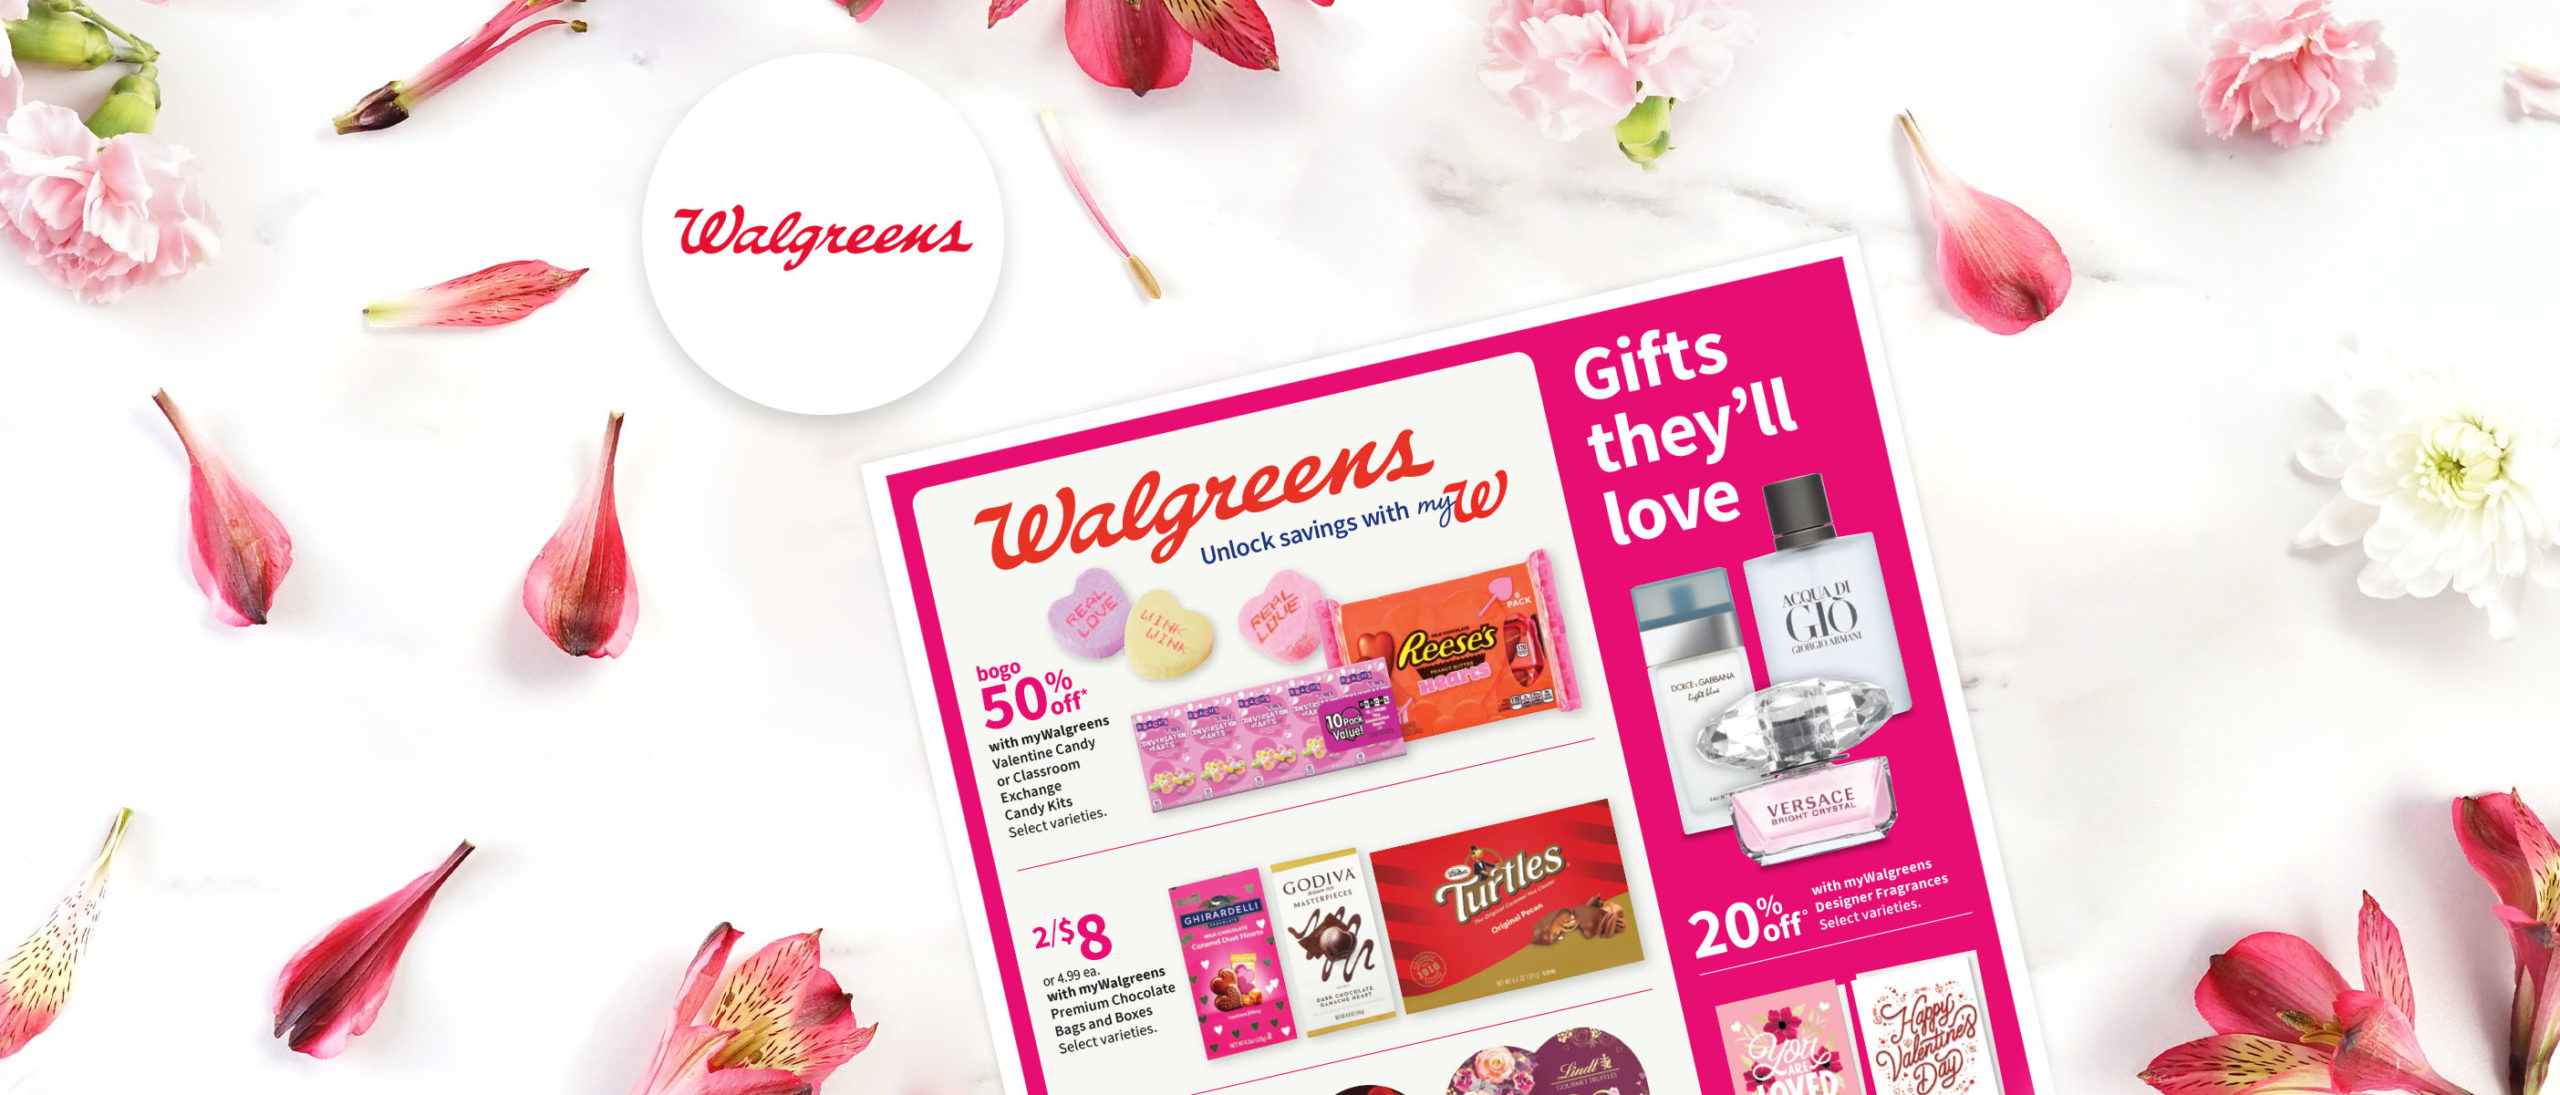 Say “Be Mine” With These Sweet and Rosy Deals from Walgreens